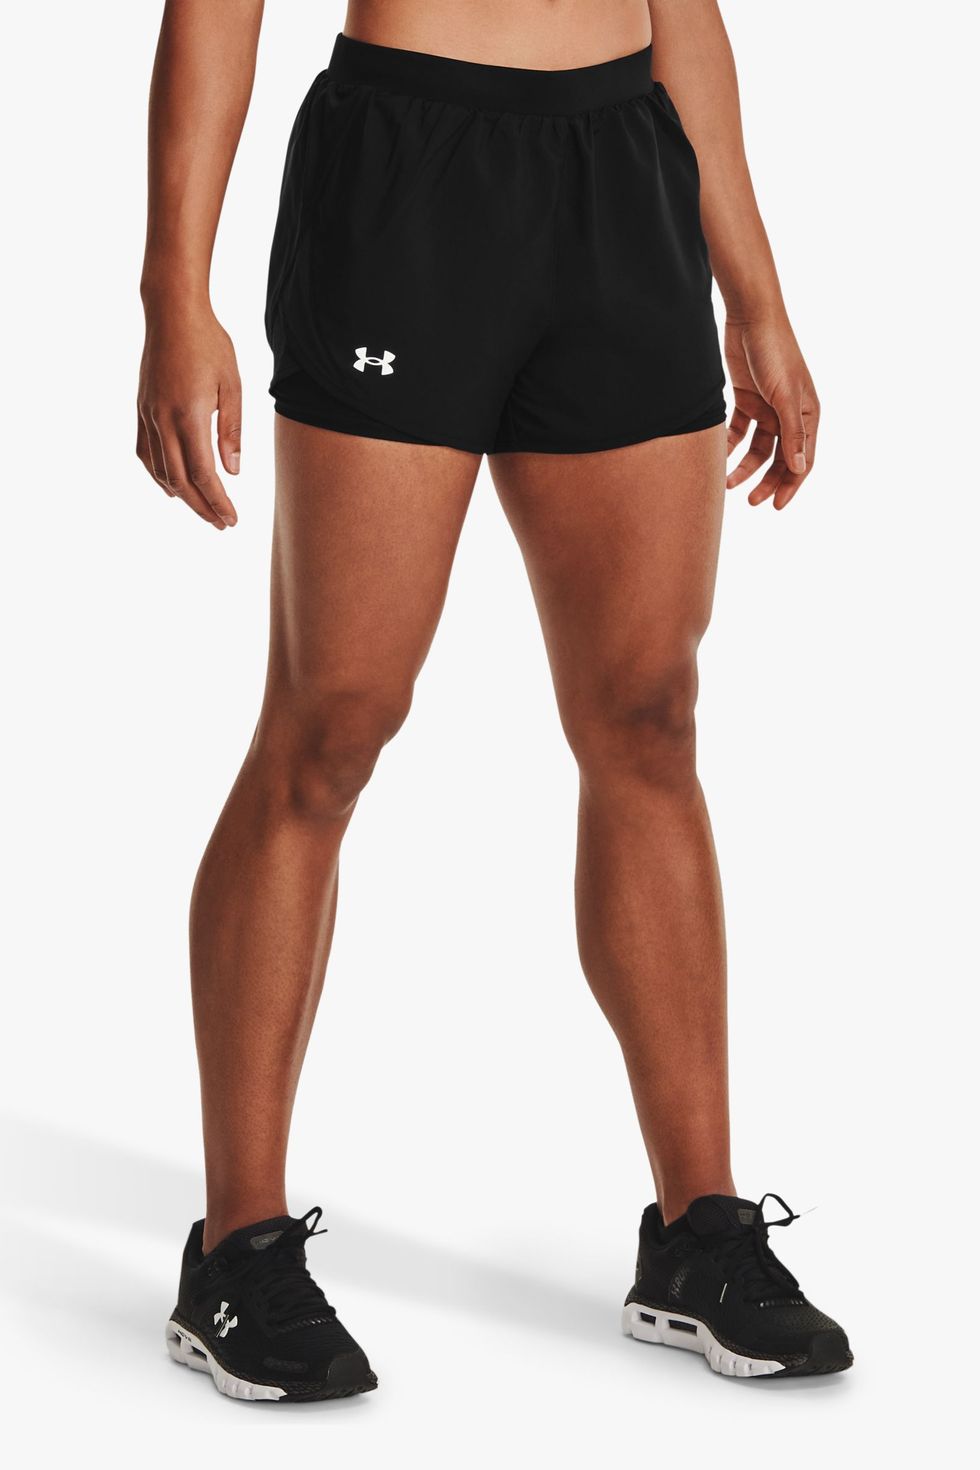 Under Armour Fly By 2.0 2-in-1 Running Shorts